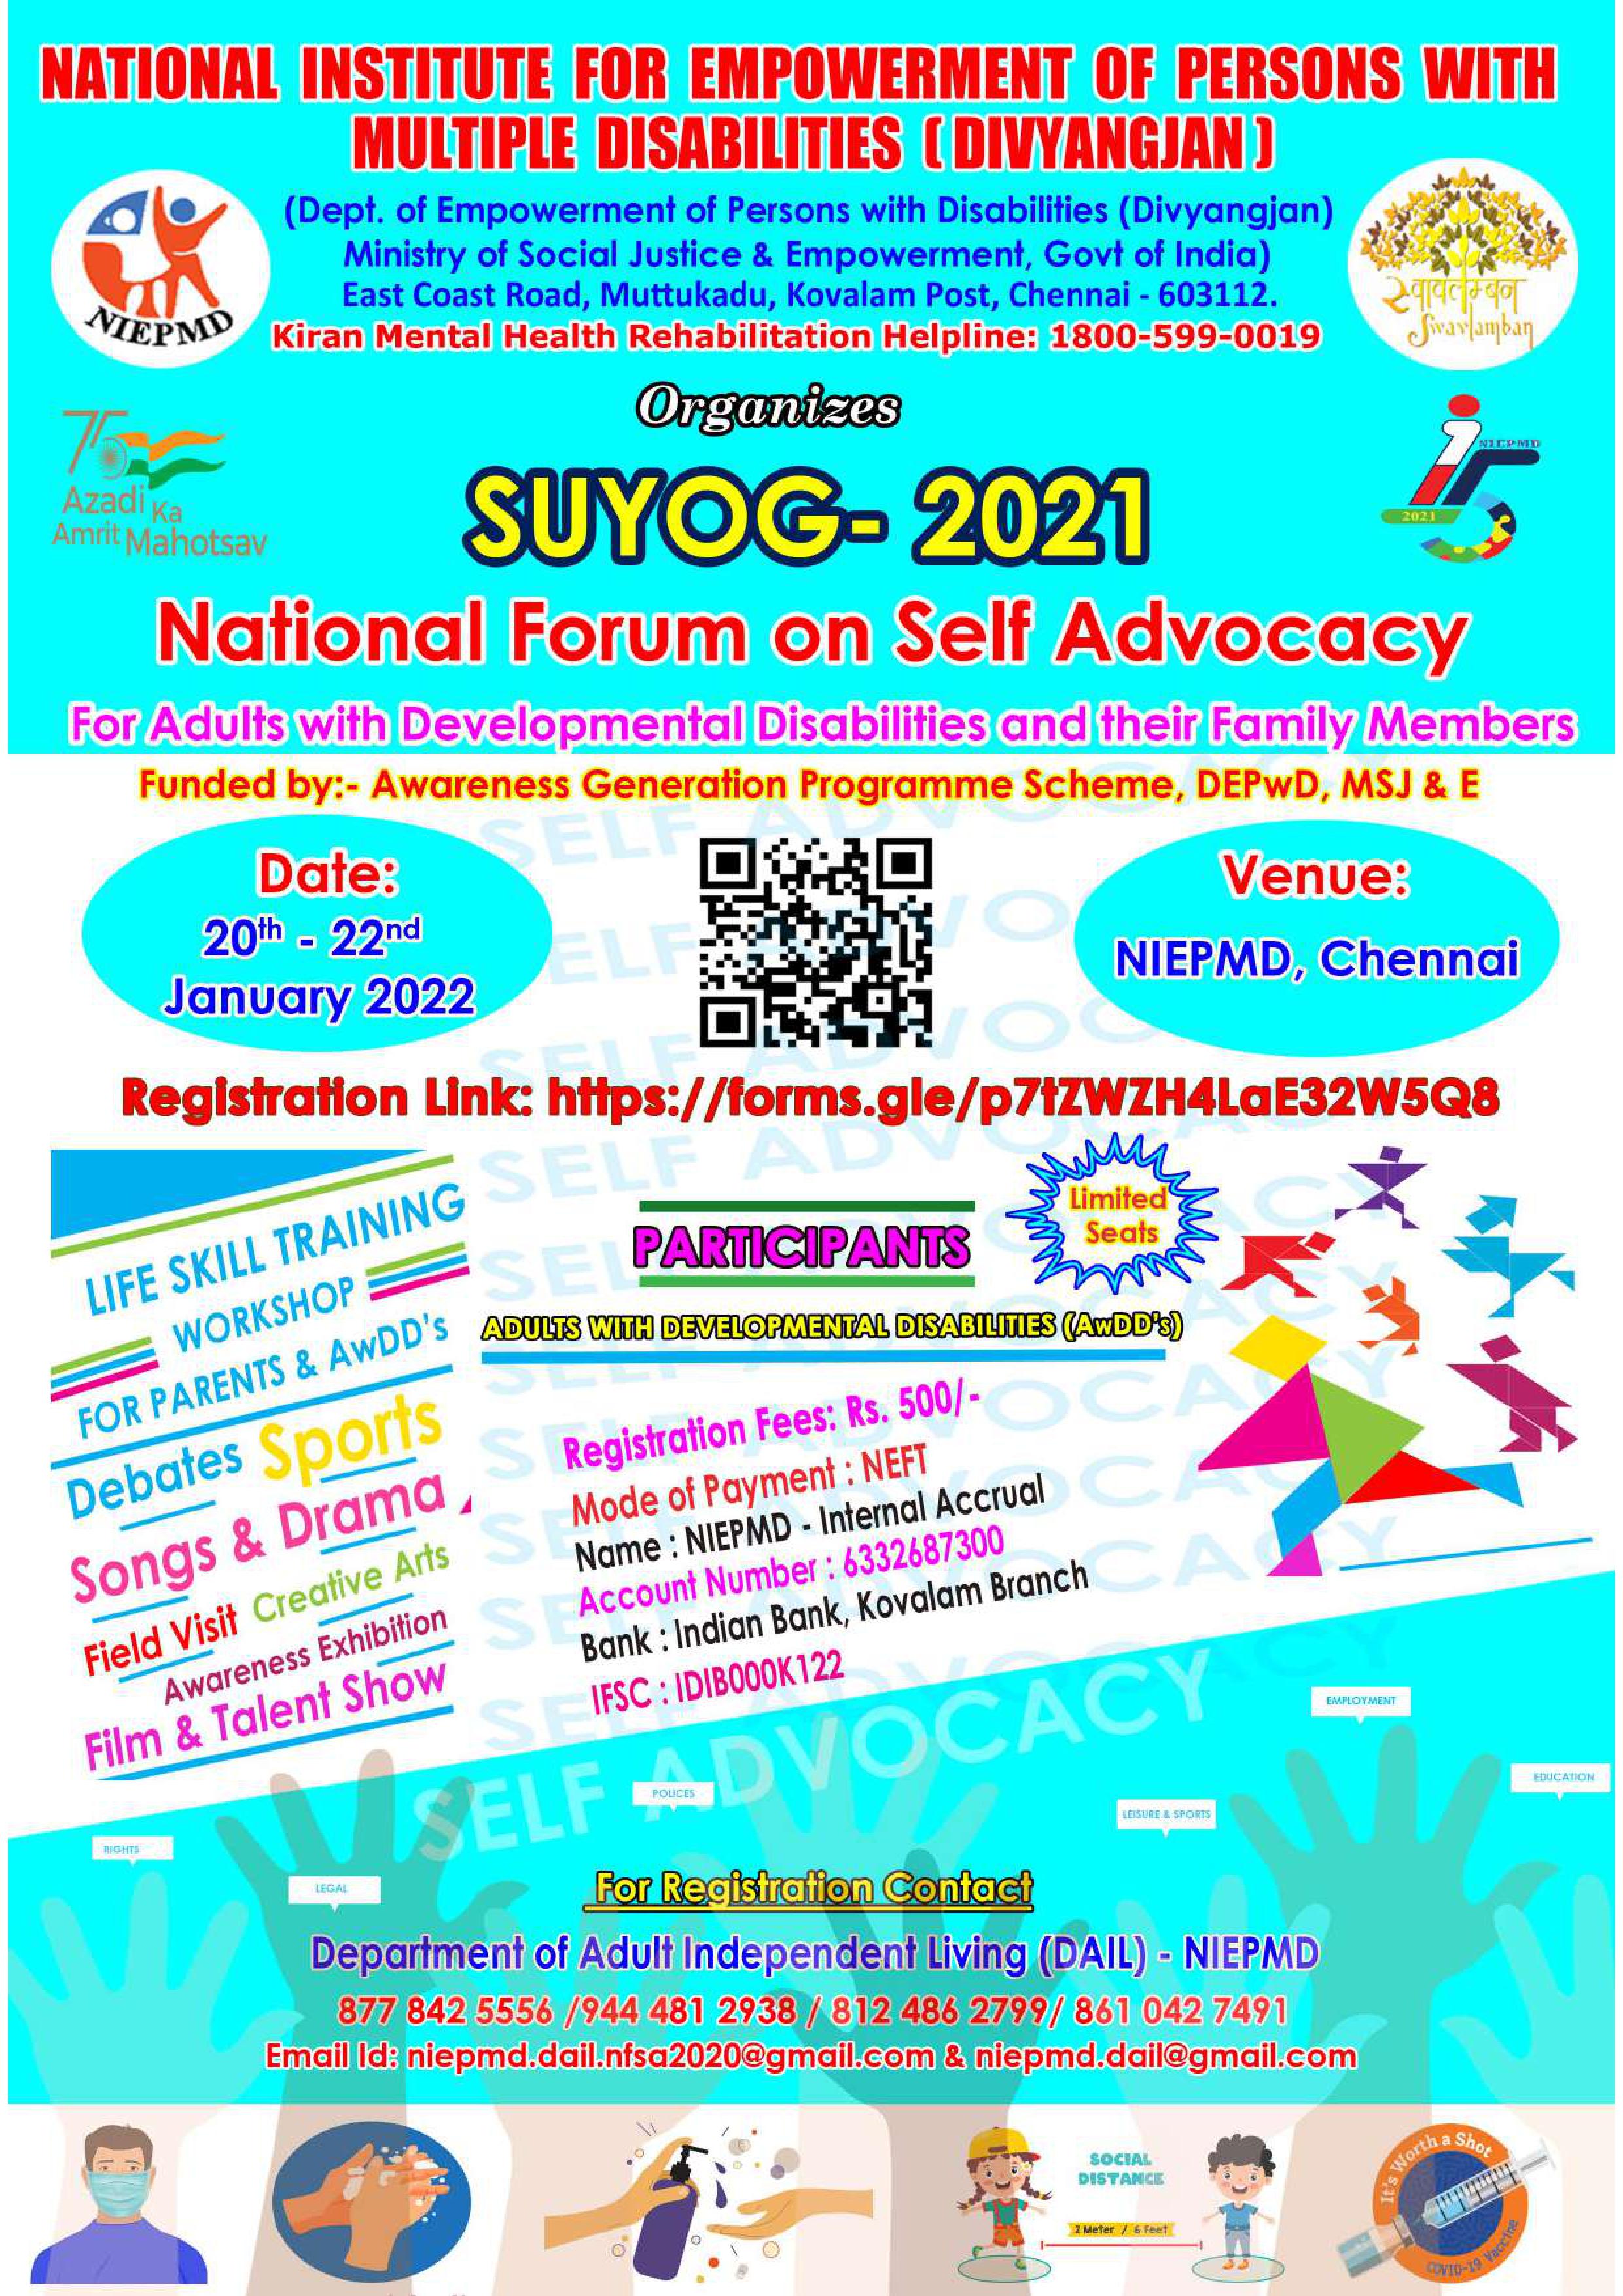 National Forum on Self Advocacy for Adults with Developmental Disabilities and their family members” scheduled from 20th - 22nd January 2022 at NIEPMD, Chennai - reg.,